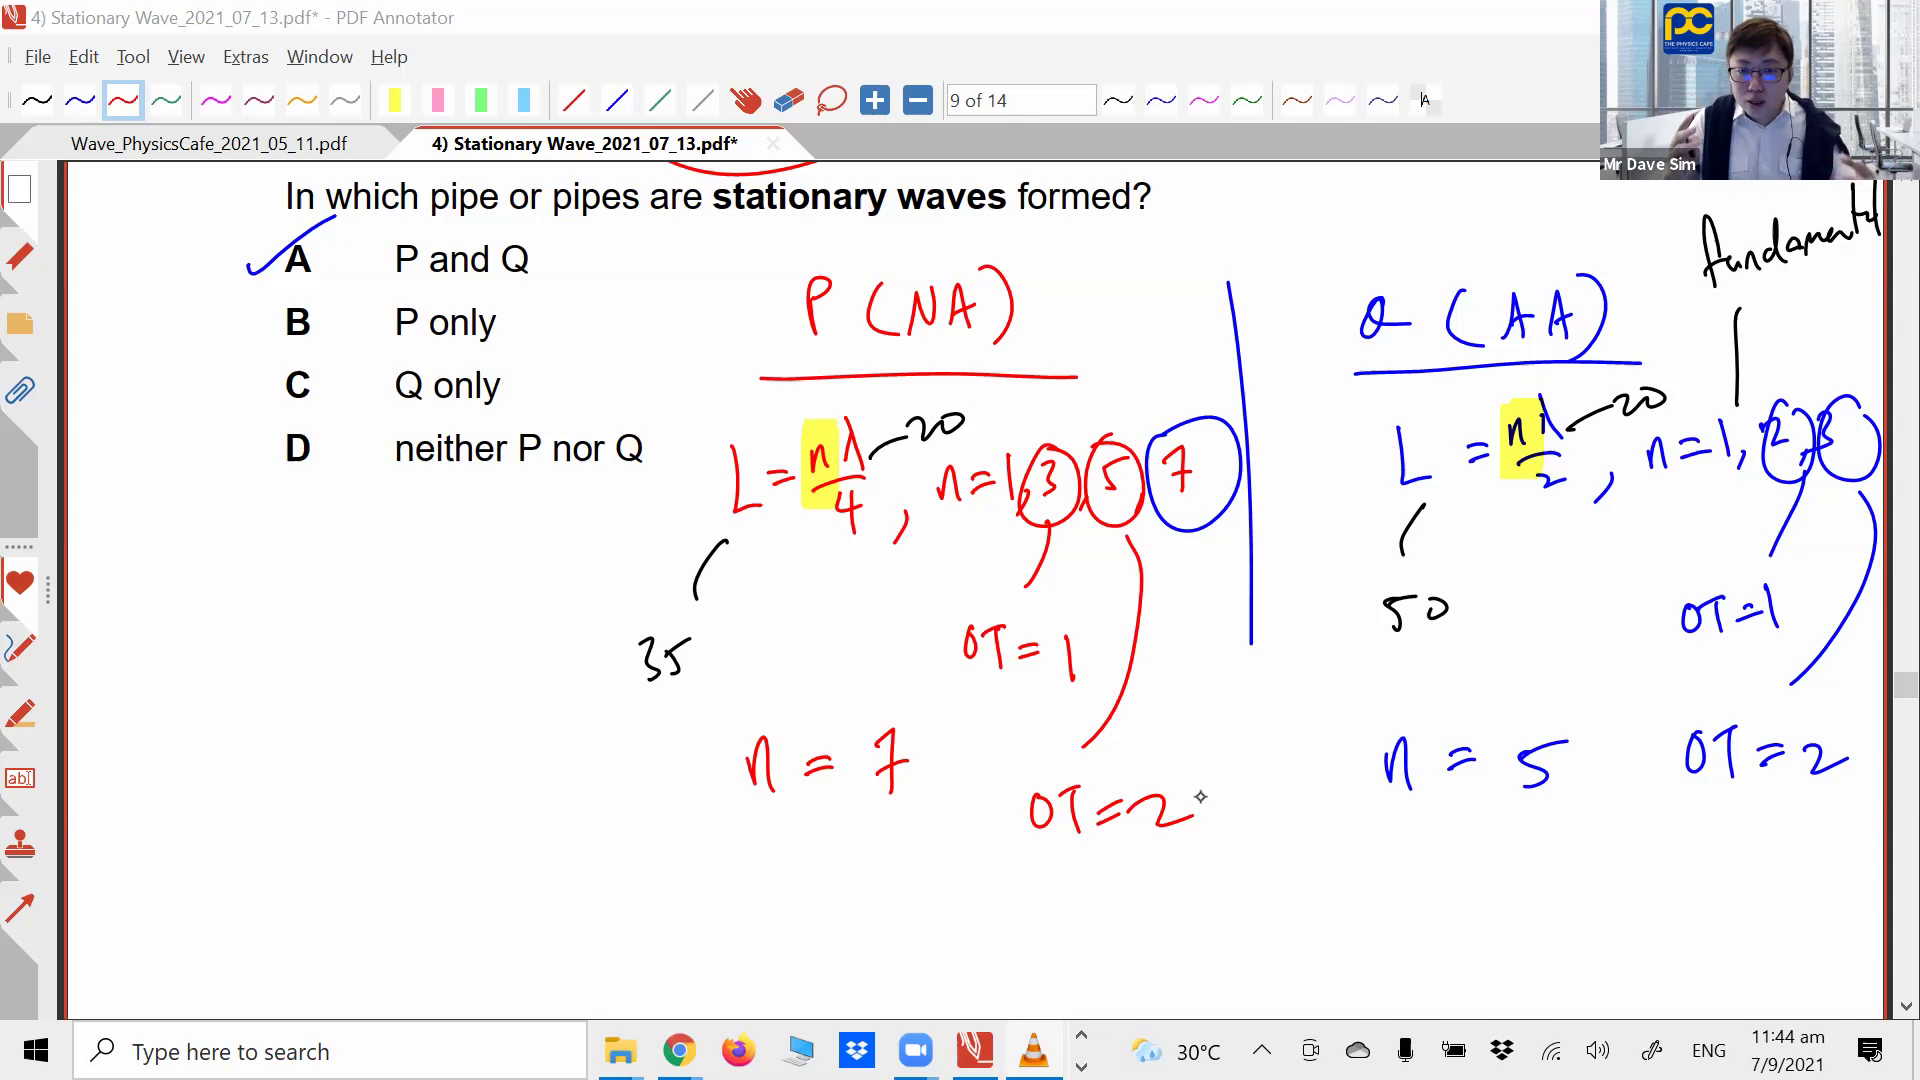 [SUPERPOSITION] Stationary Waves